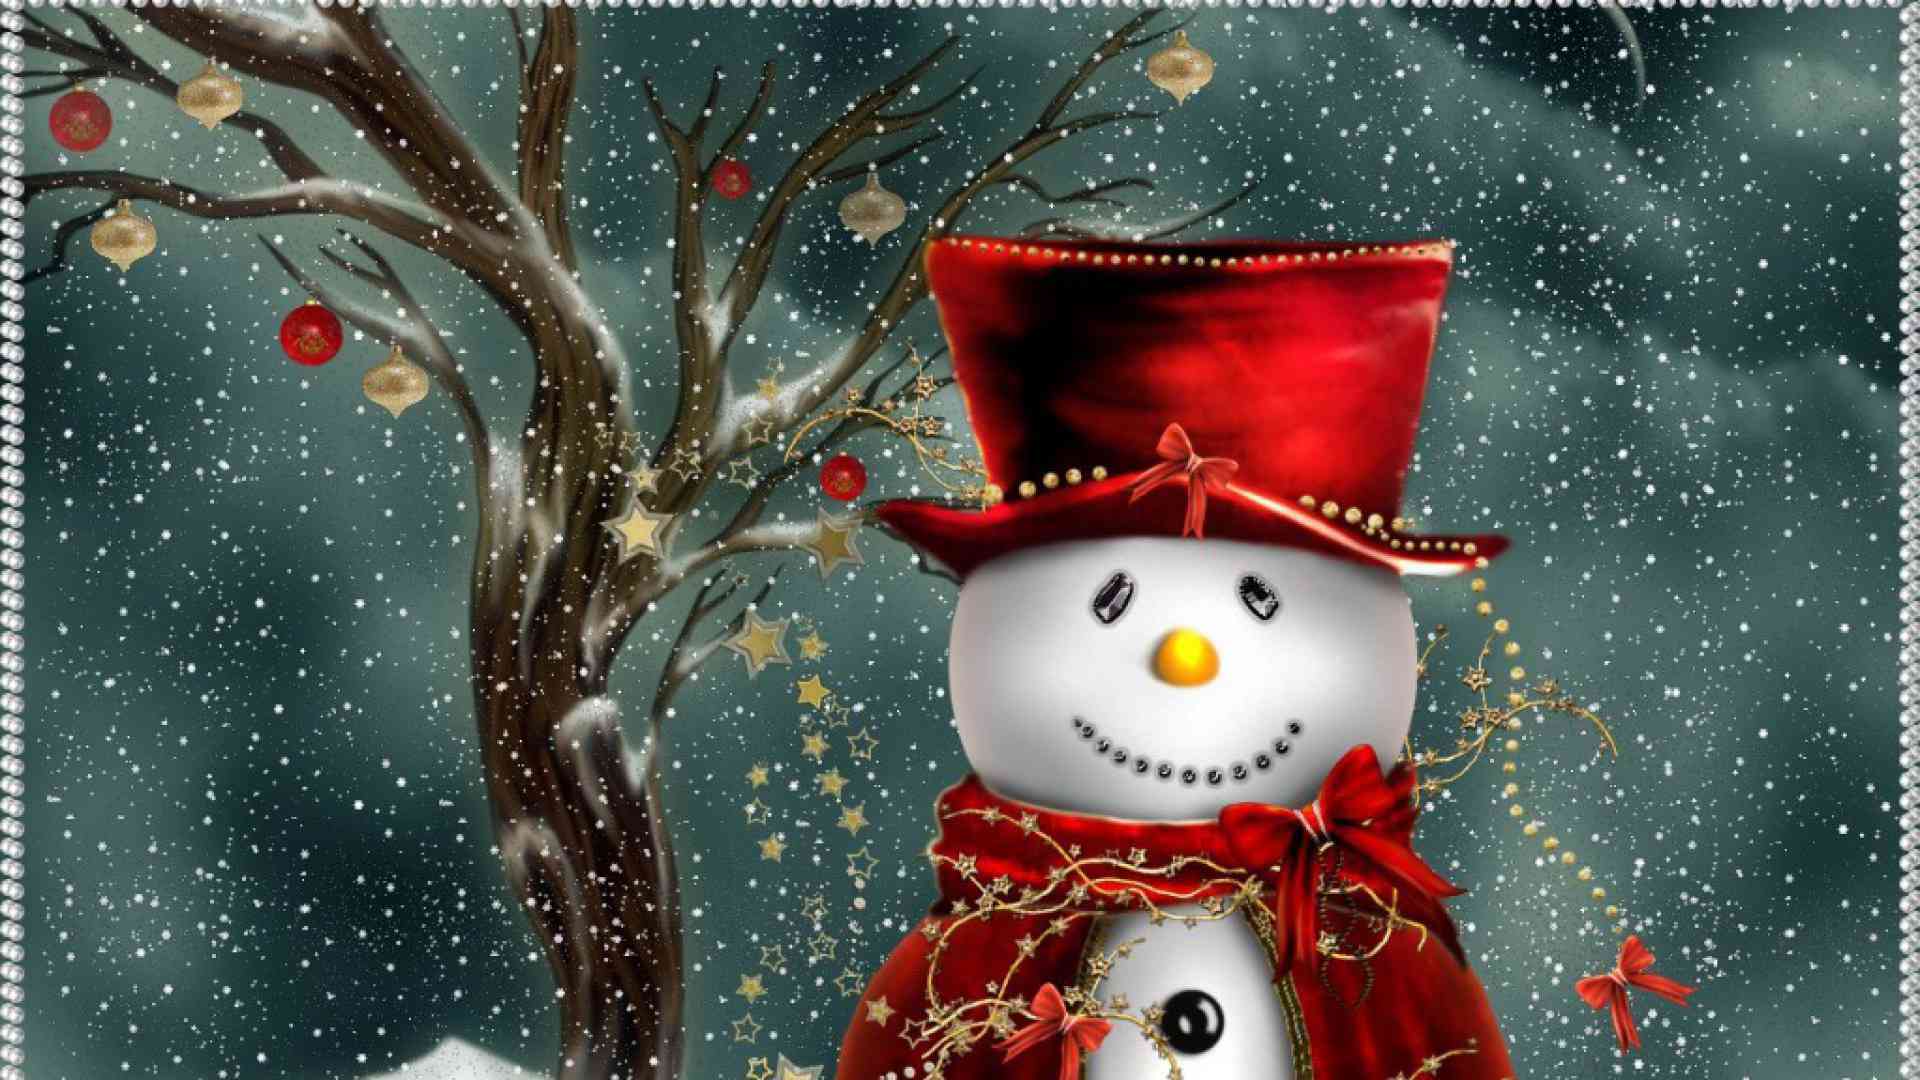 The Top 26 Free Christmas Wallpapers